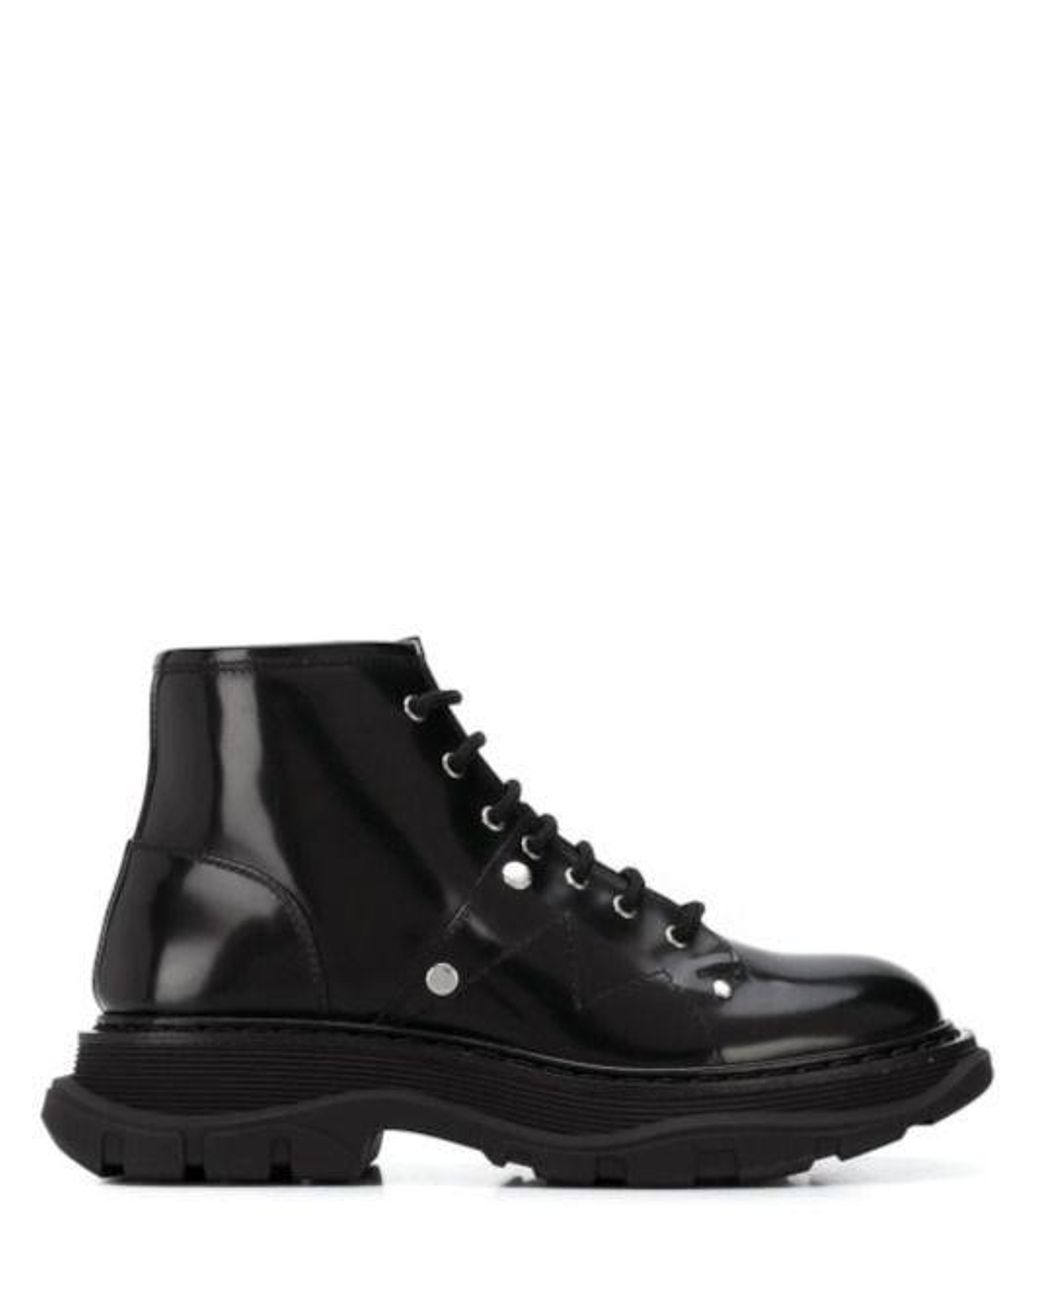 Alexander McQueen Rubber Tread Lace Up Boot in Black - Lyst